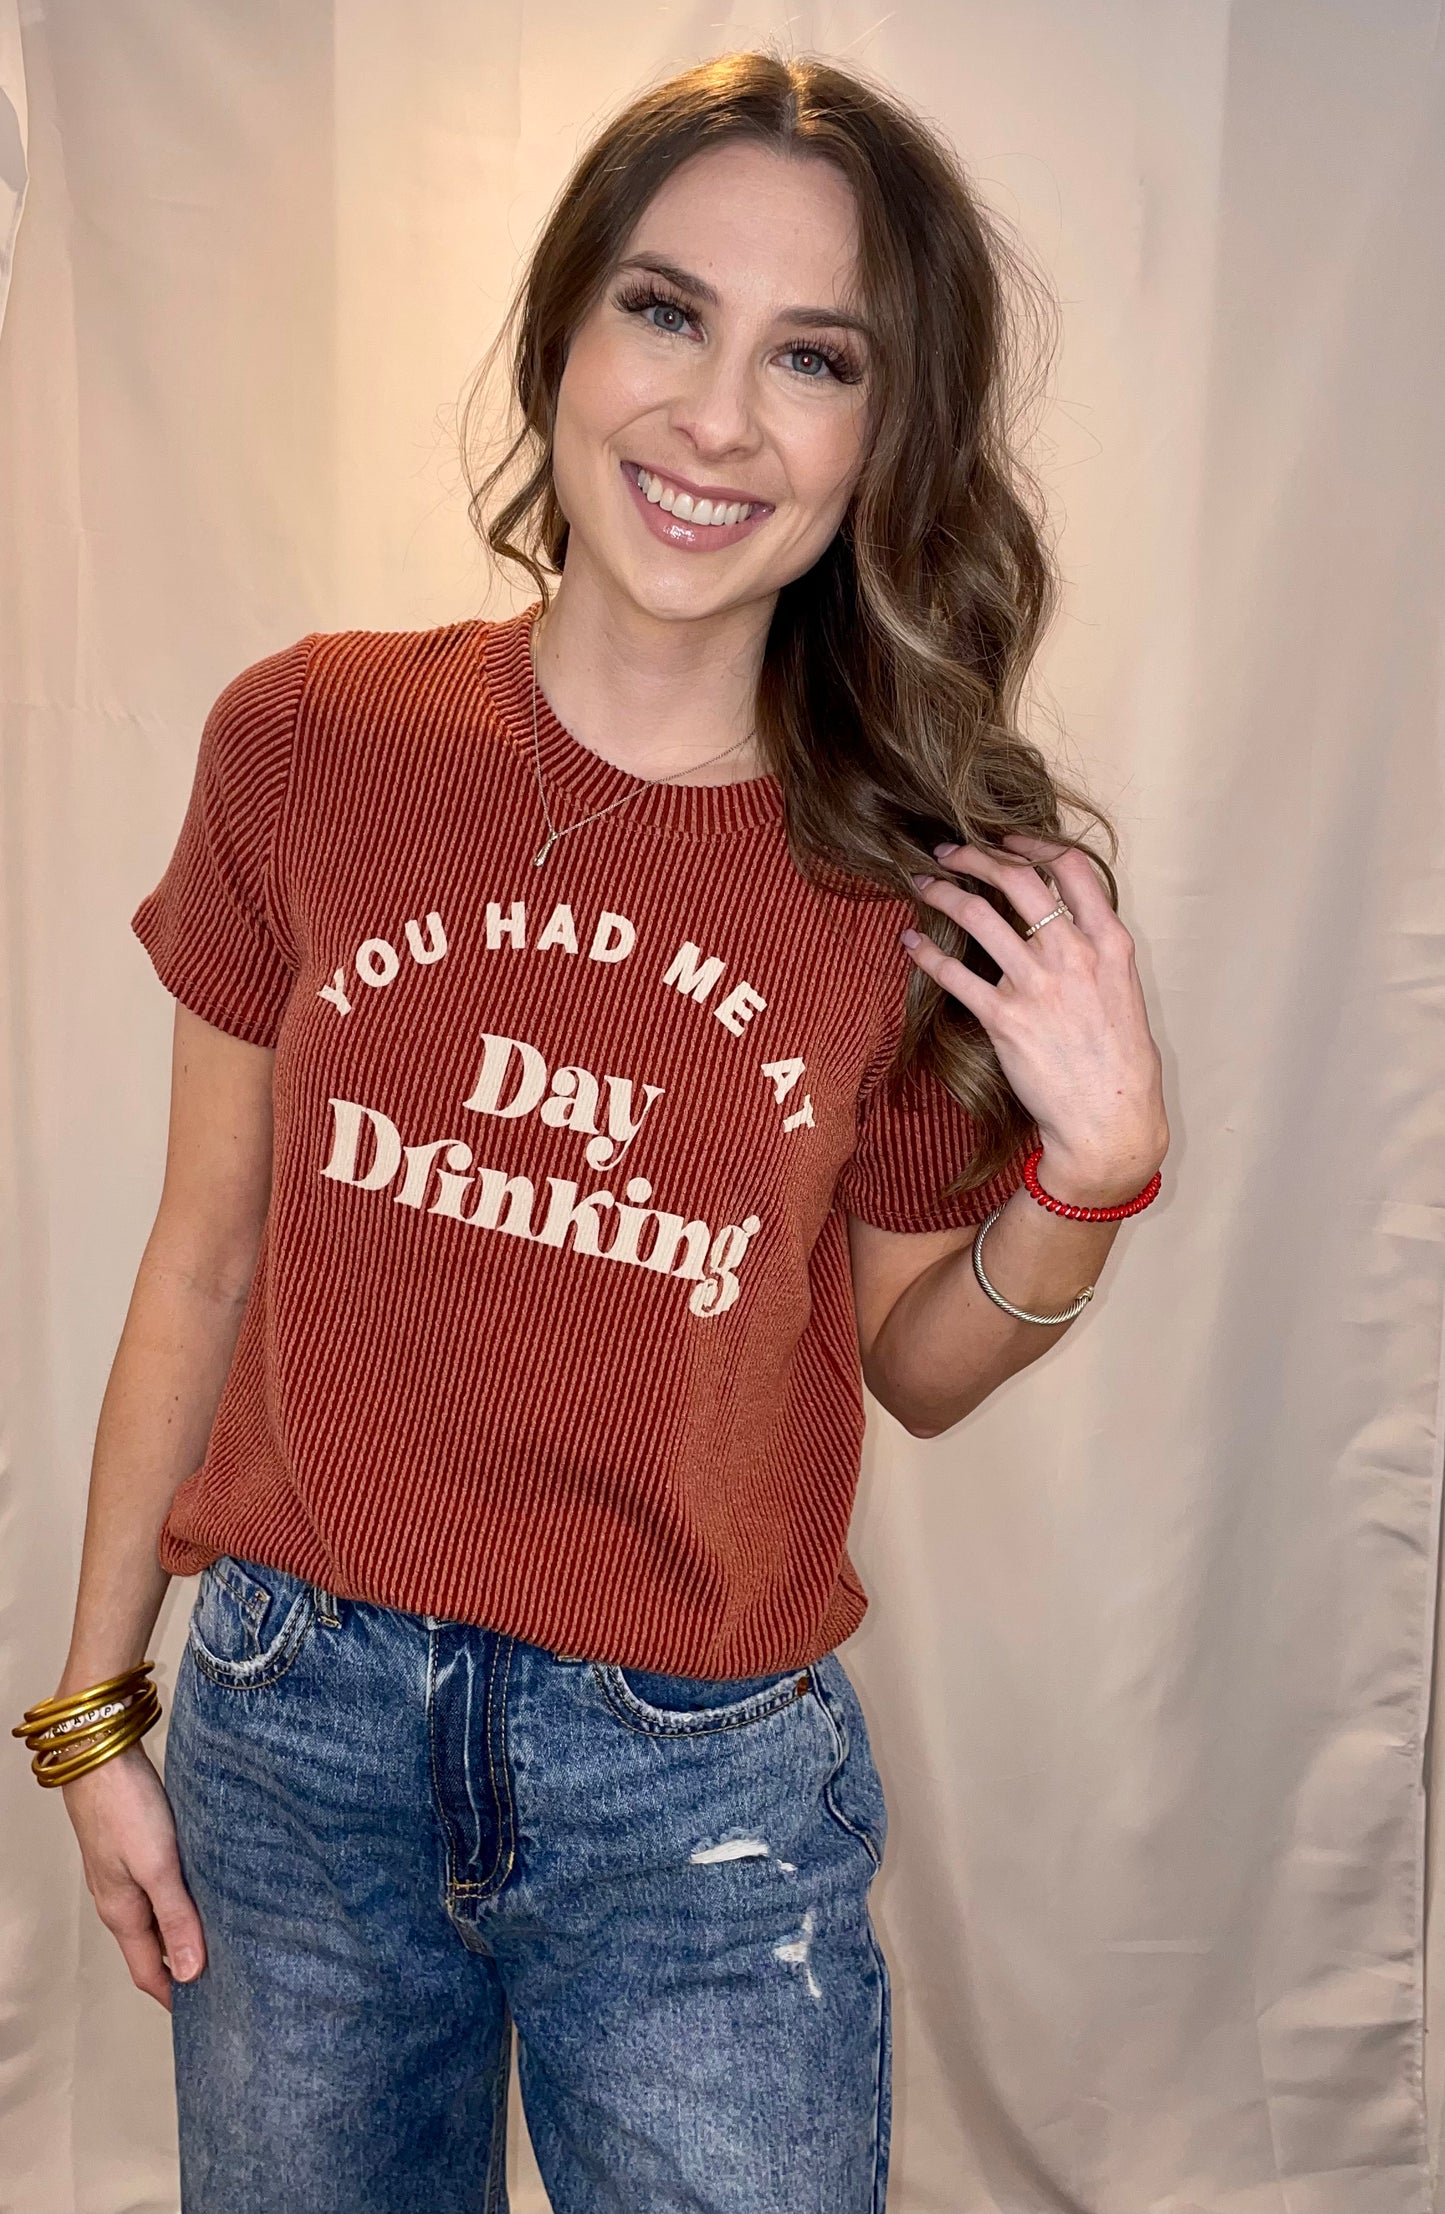 You Had Me at Day Drinking Tee